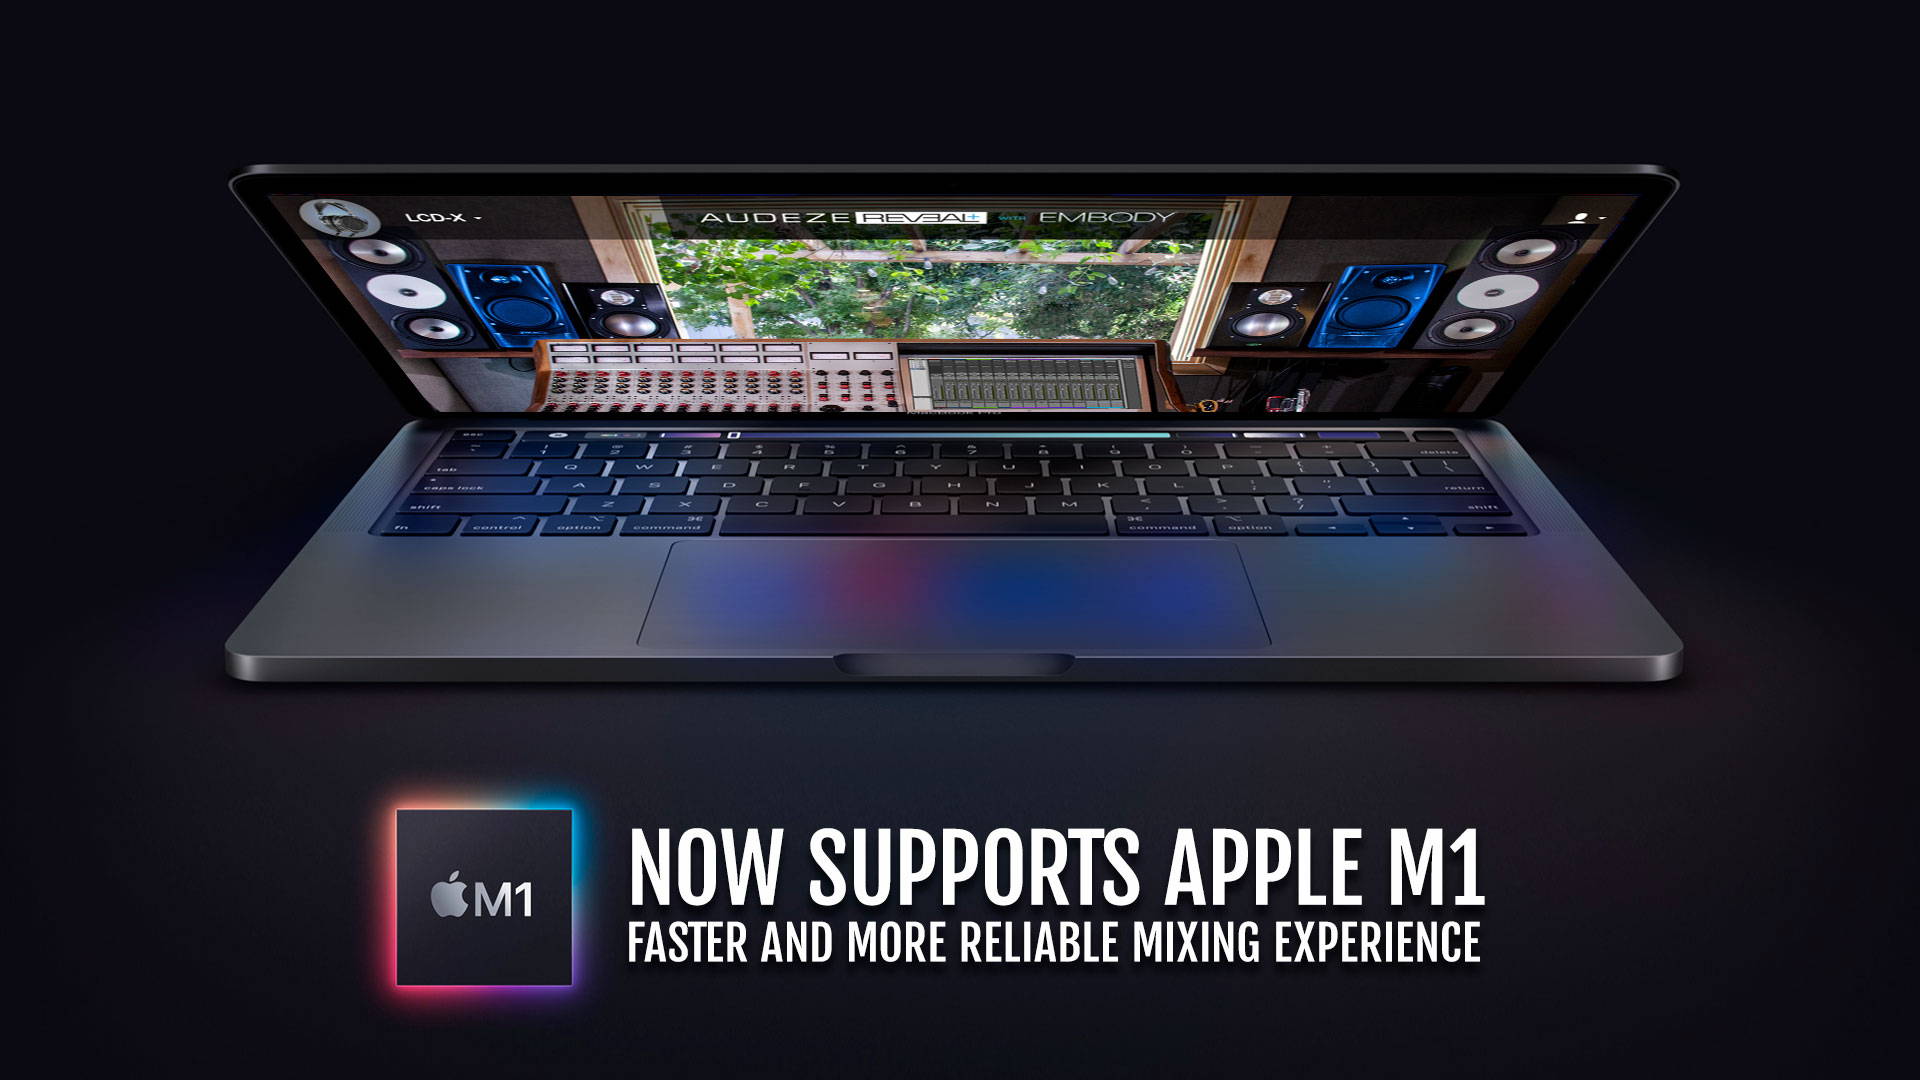 Reveal+ with Apple M1 Desktops Now Supports APPLE M1 FASTER AND MORE RELIABLE MIXING EXPERIENCES